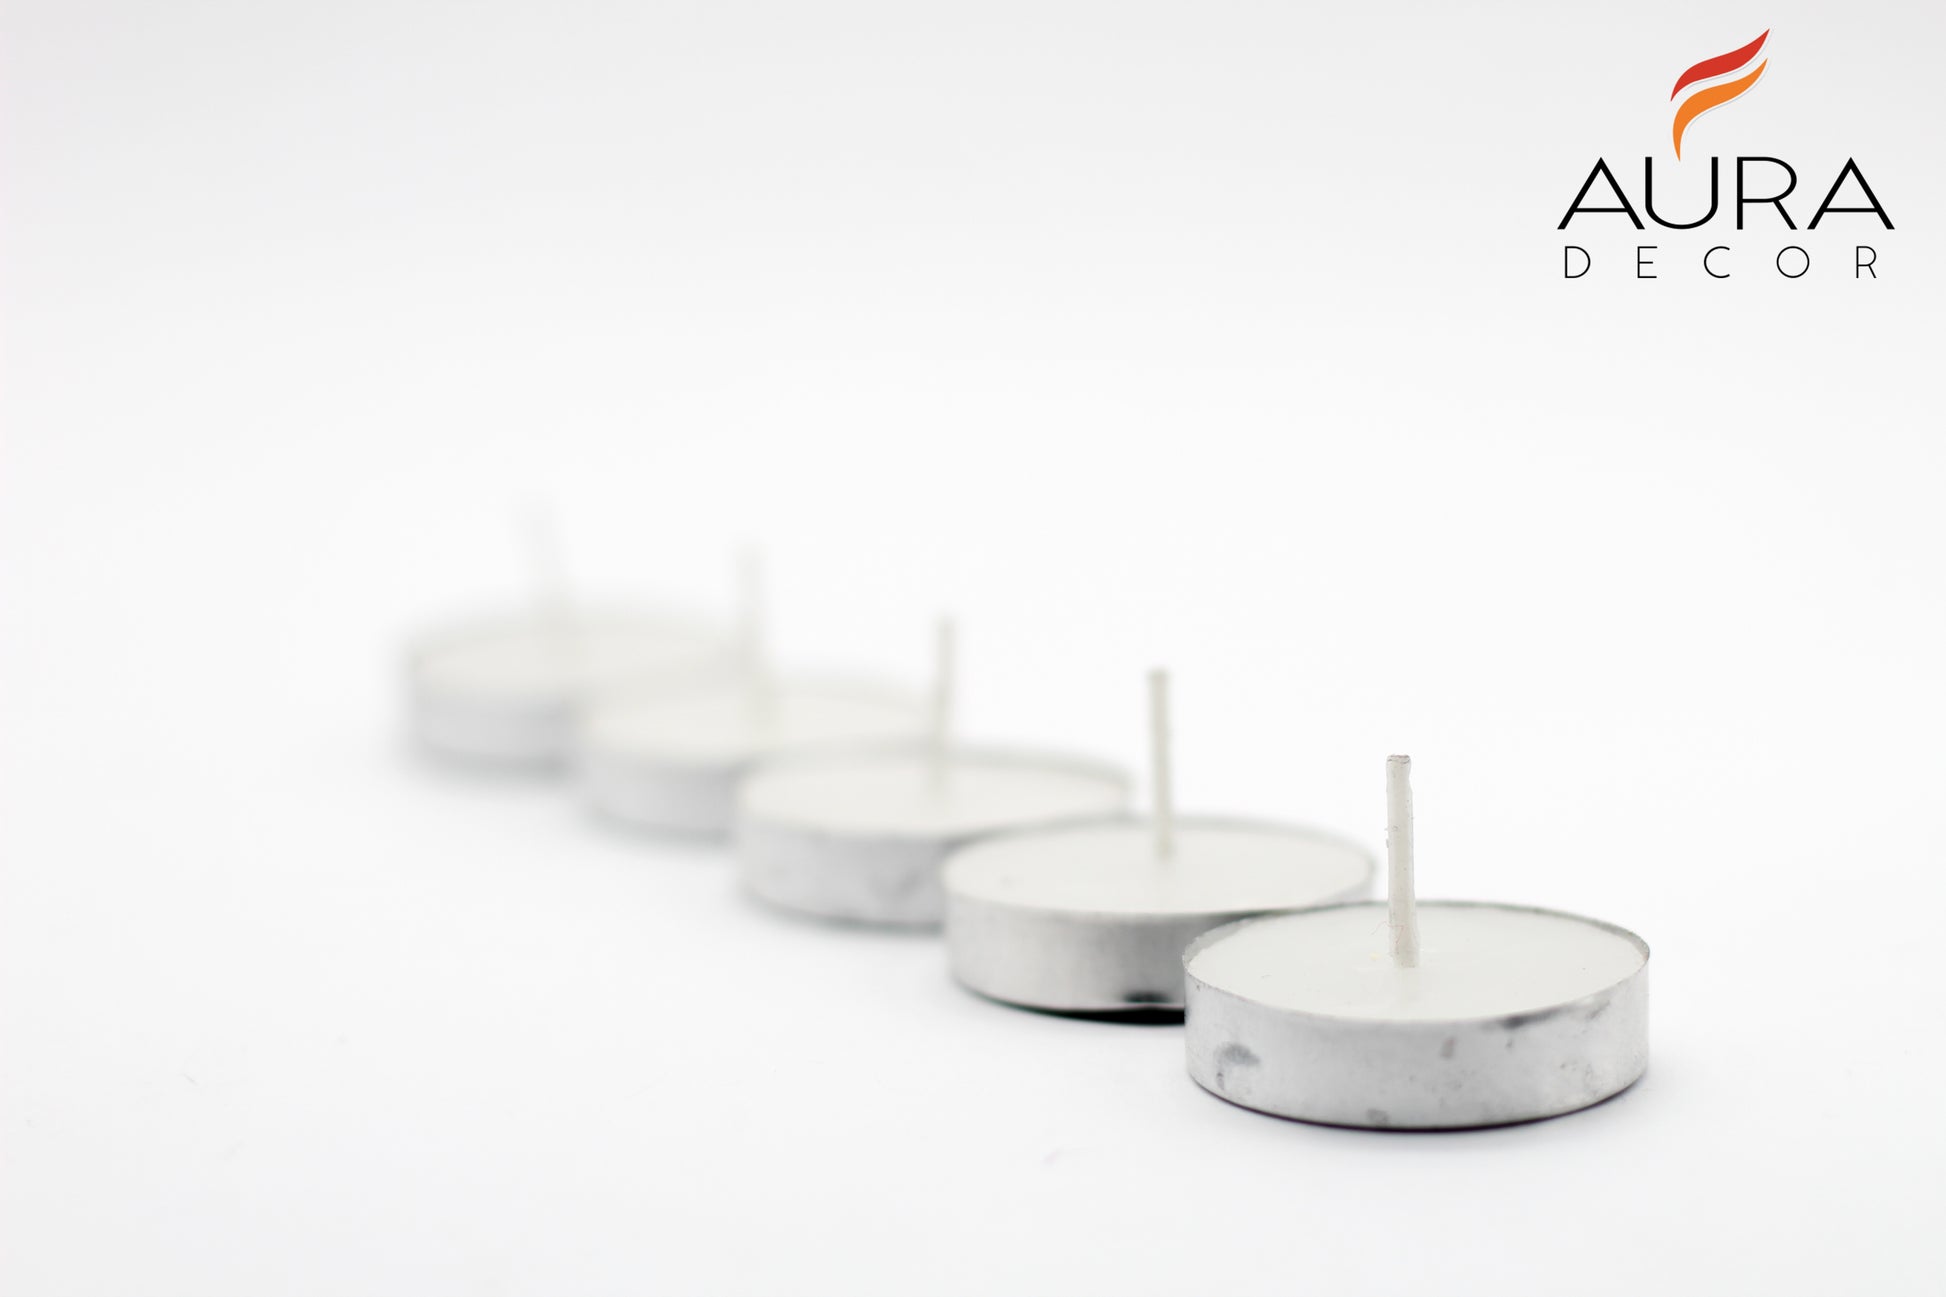 Pack of 50 Smokeless Tealight Candle (Burning Time 2.5 hours approx) - auradecor.co.in